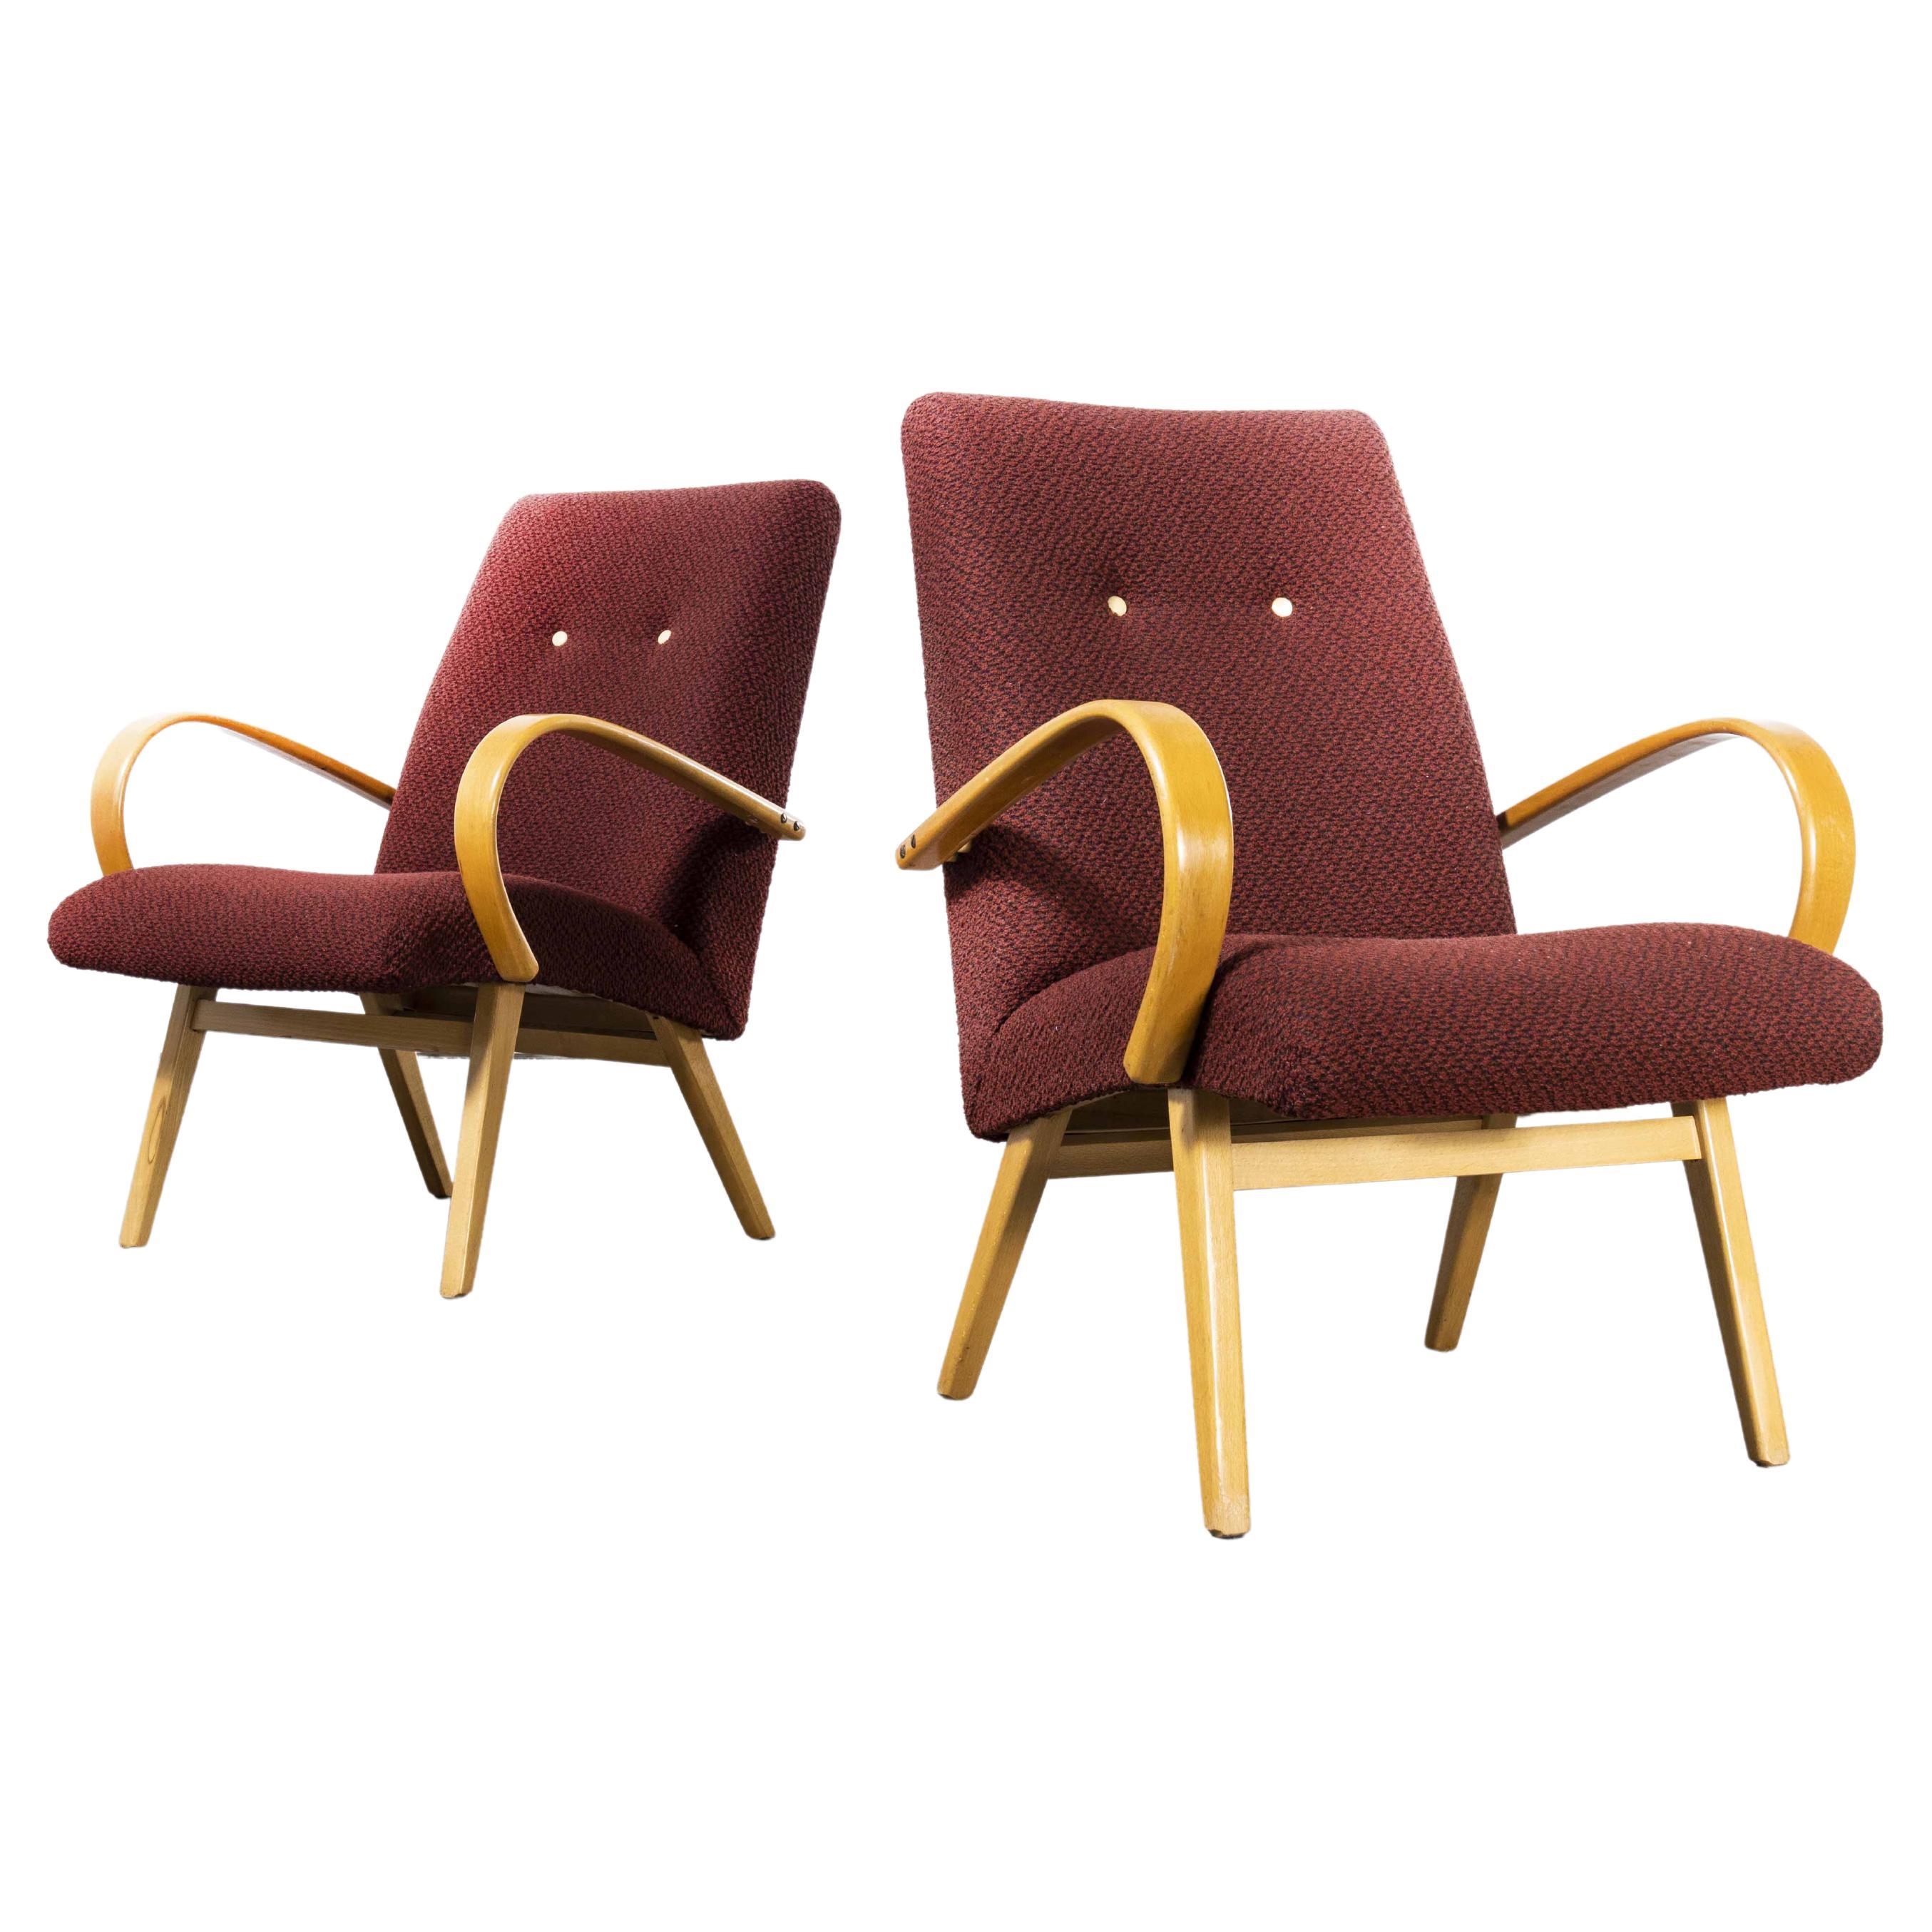 1960's Original Pair Of Red Armchairs, Produced By Up Zavody For Sale